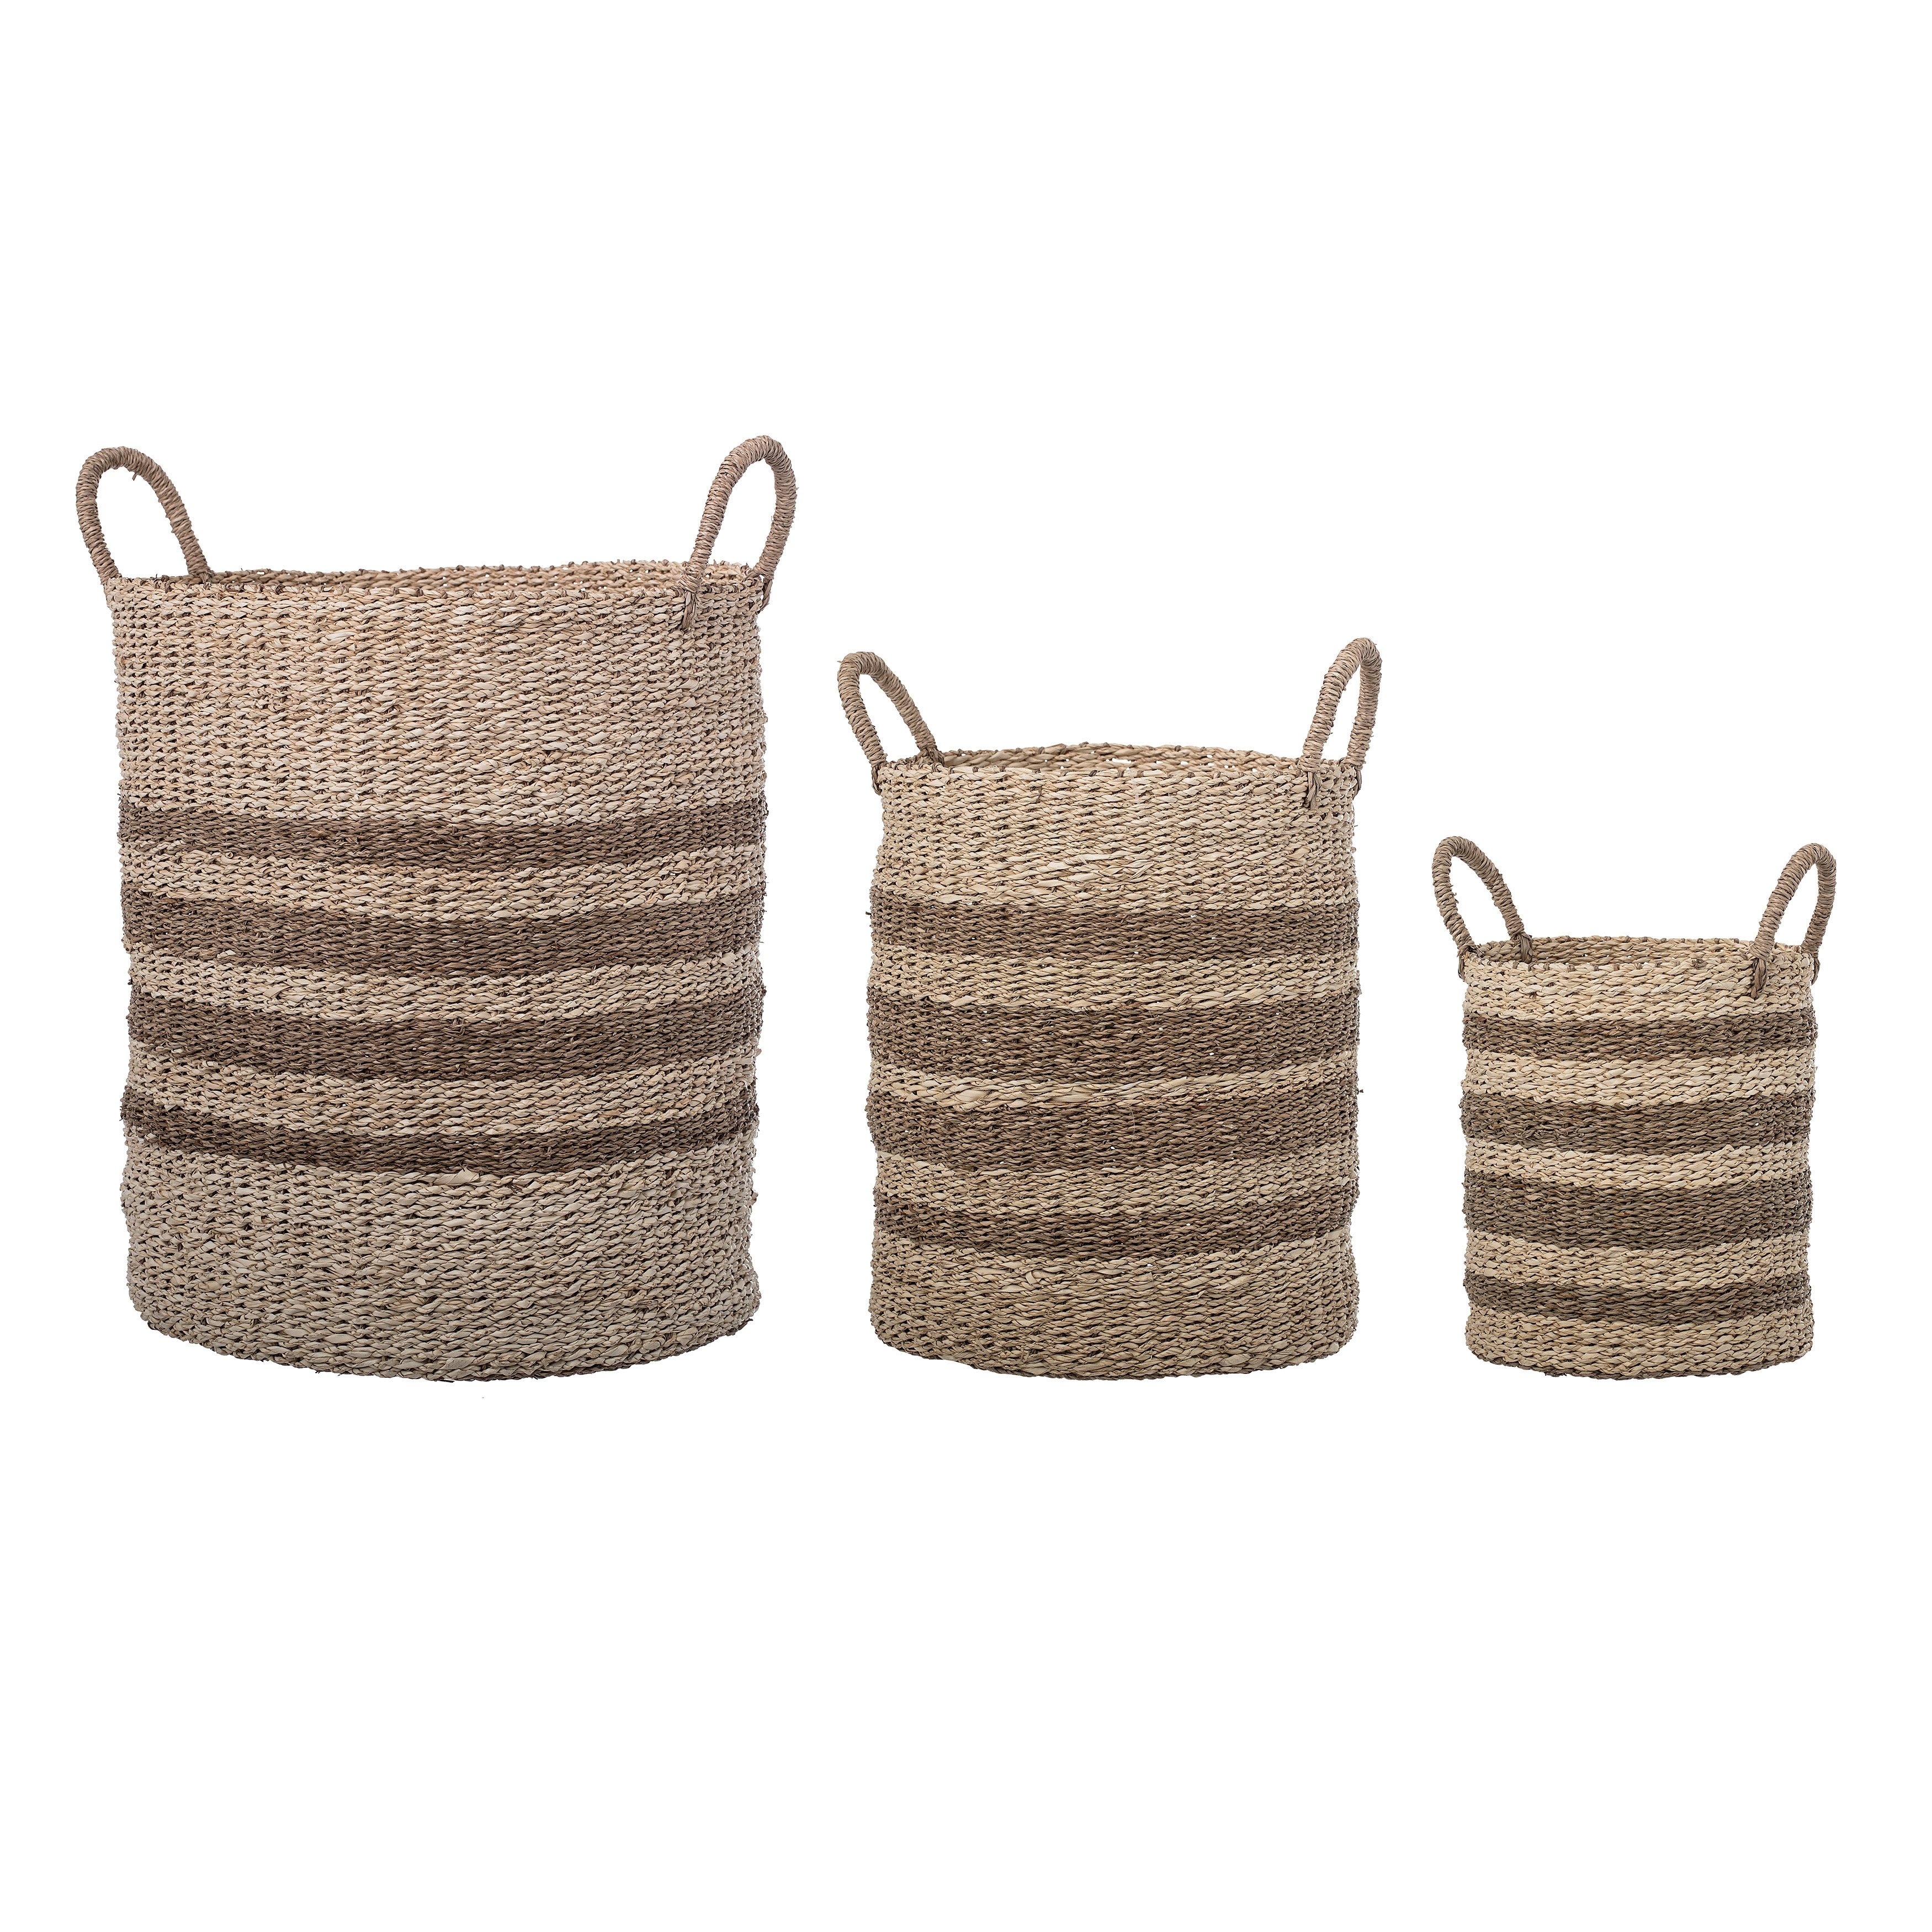 Brown Striped Natural Seagrass & Palm Baskets with Handles (Set of 3 Sizes) - Image 0